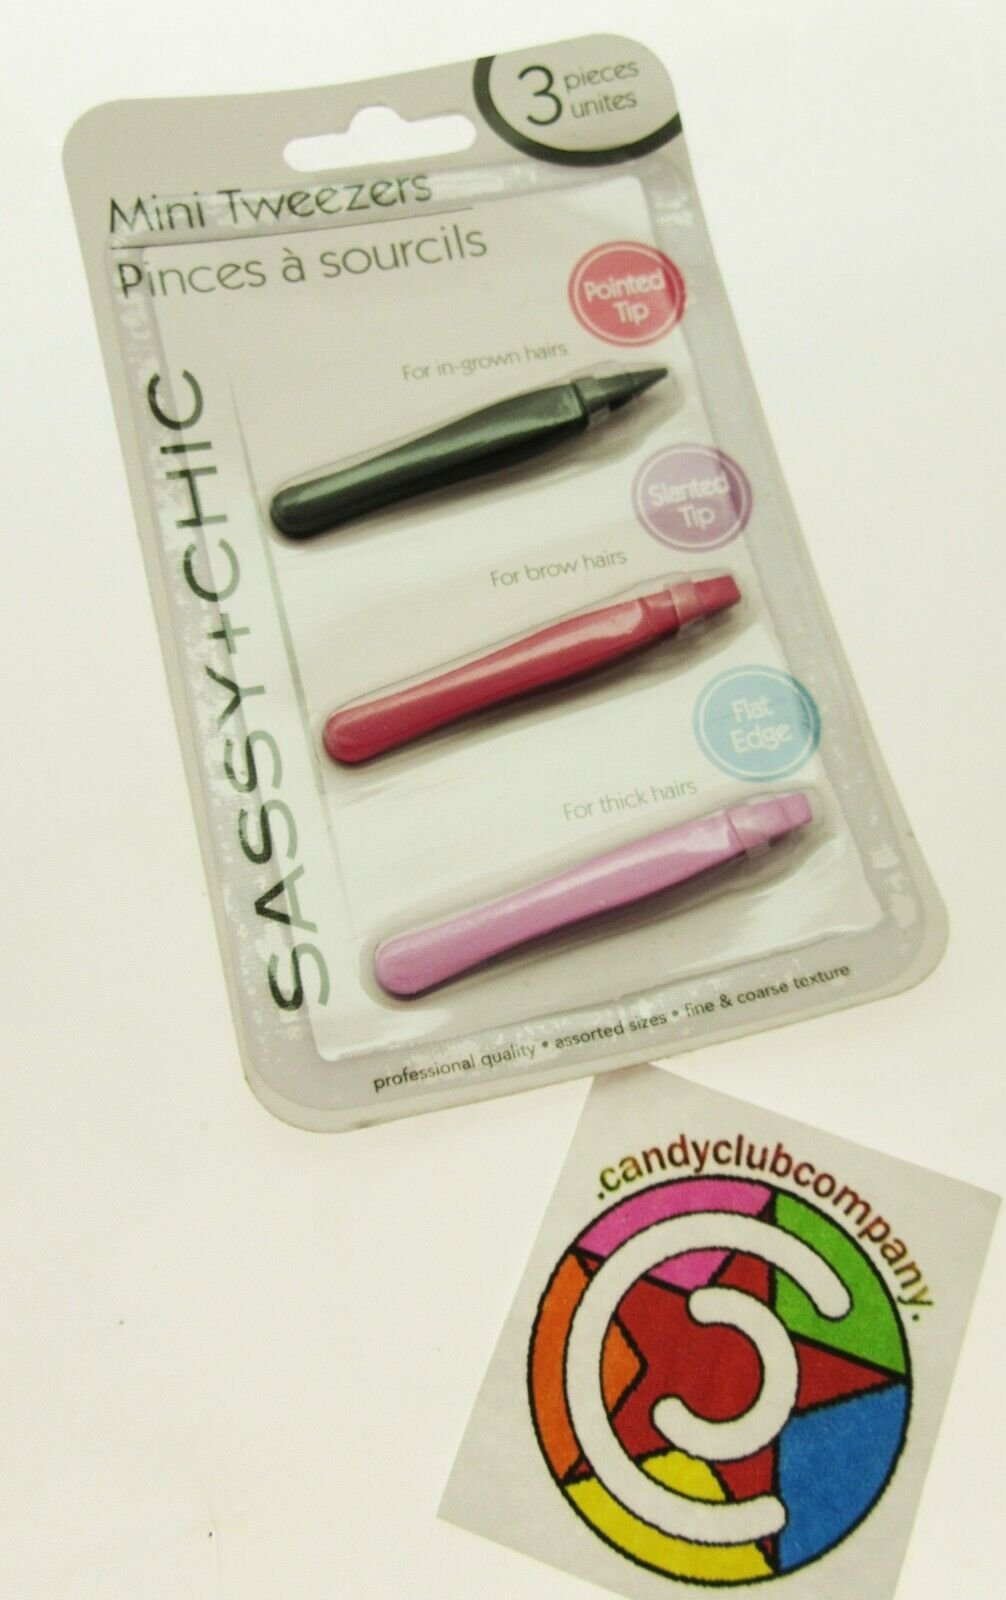 Mini tweezers ~ Sassy & Chic ~ 3pc set For In-Grown Brow & Thick Hairs Hair